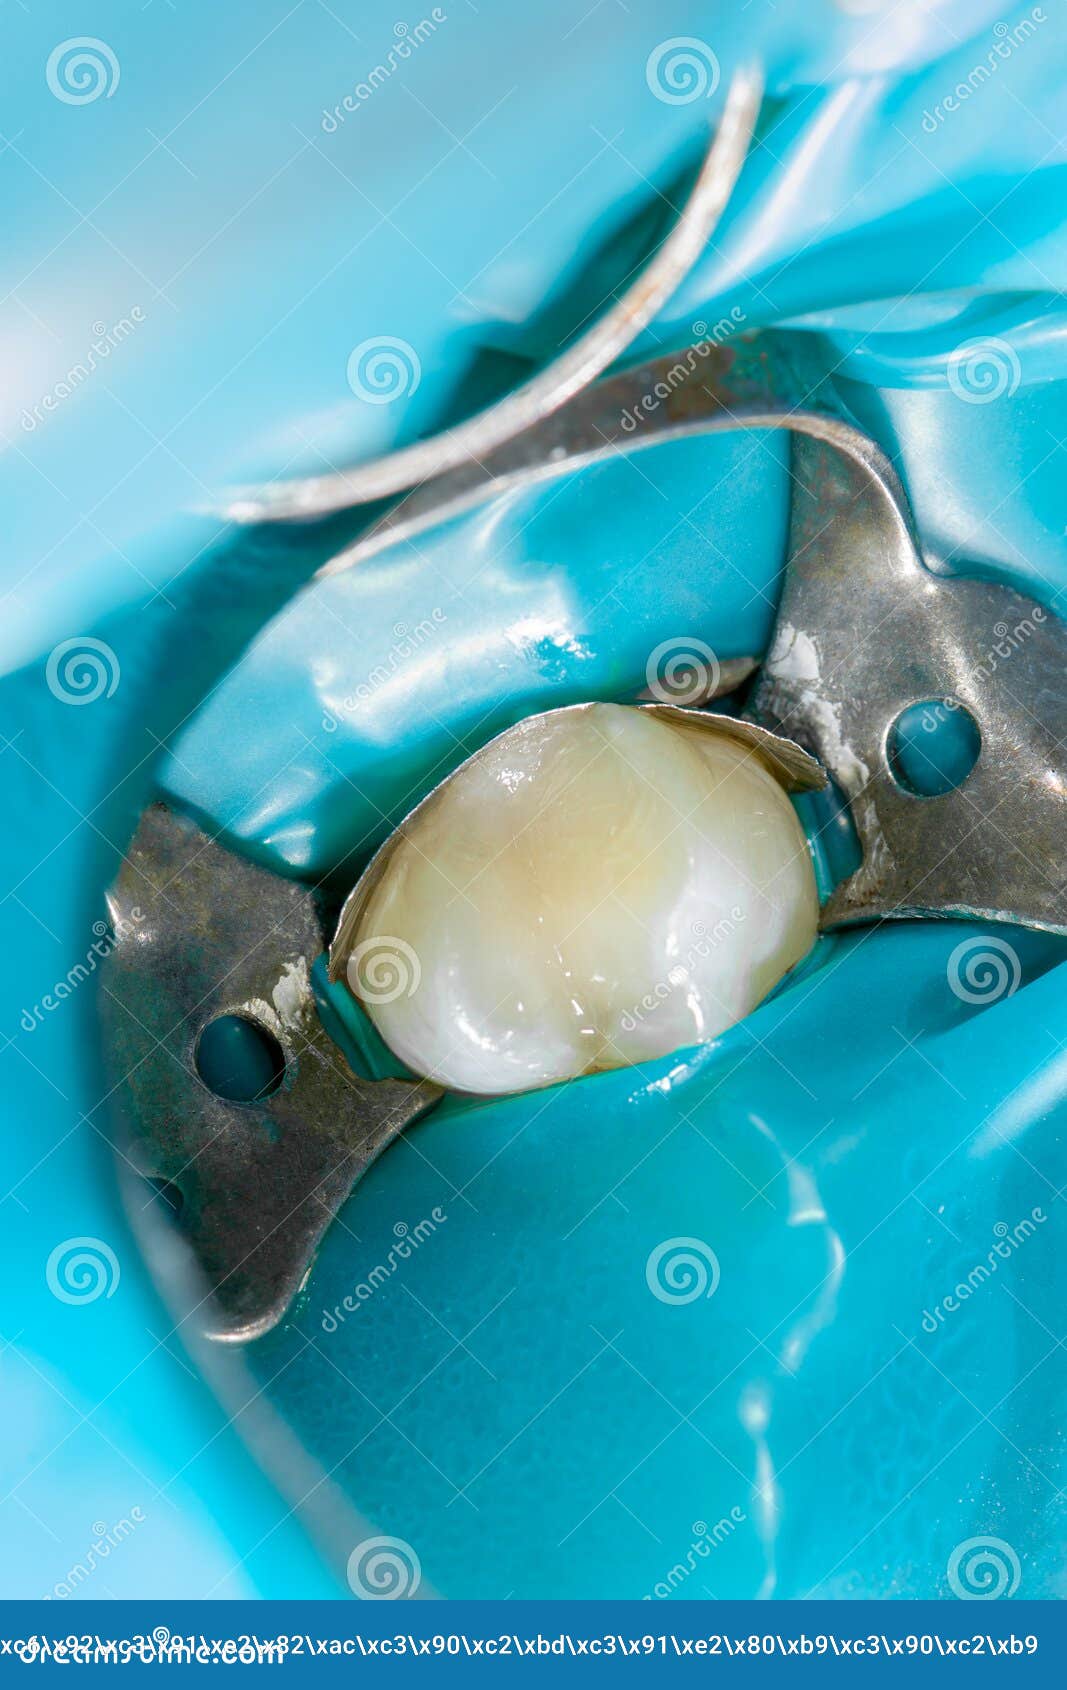 caries and tooth disease. filling with a dental composite photopolymer material using rubber dam. the concept of dental treatment